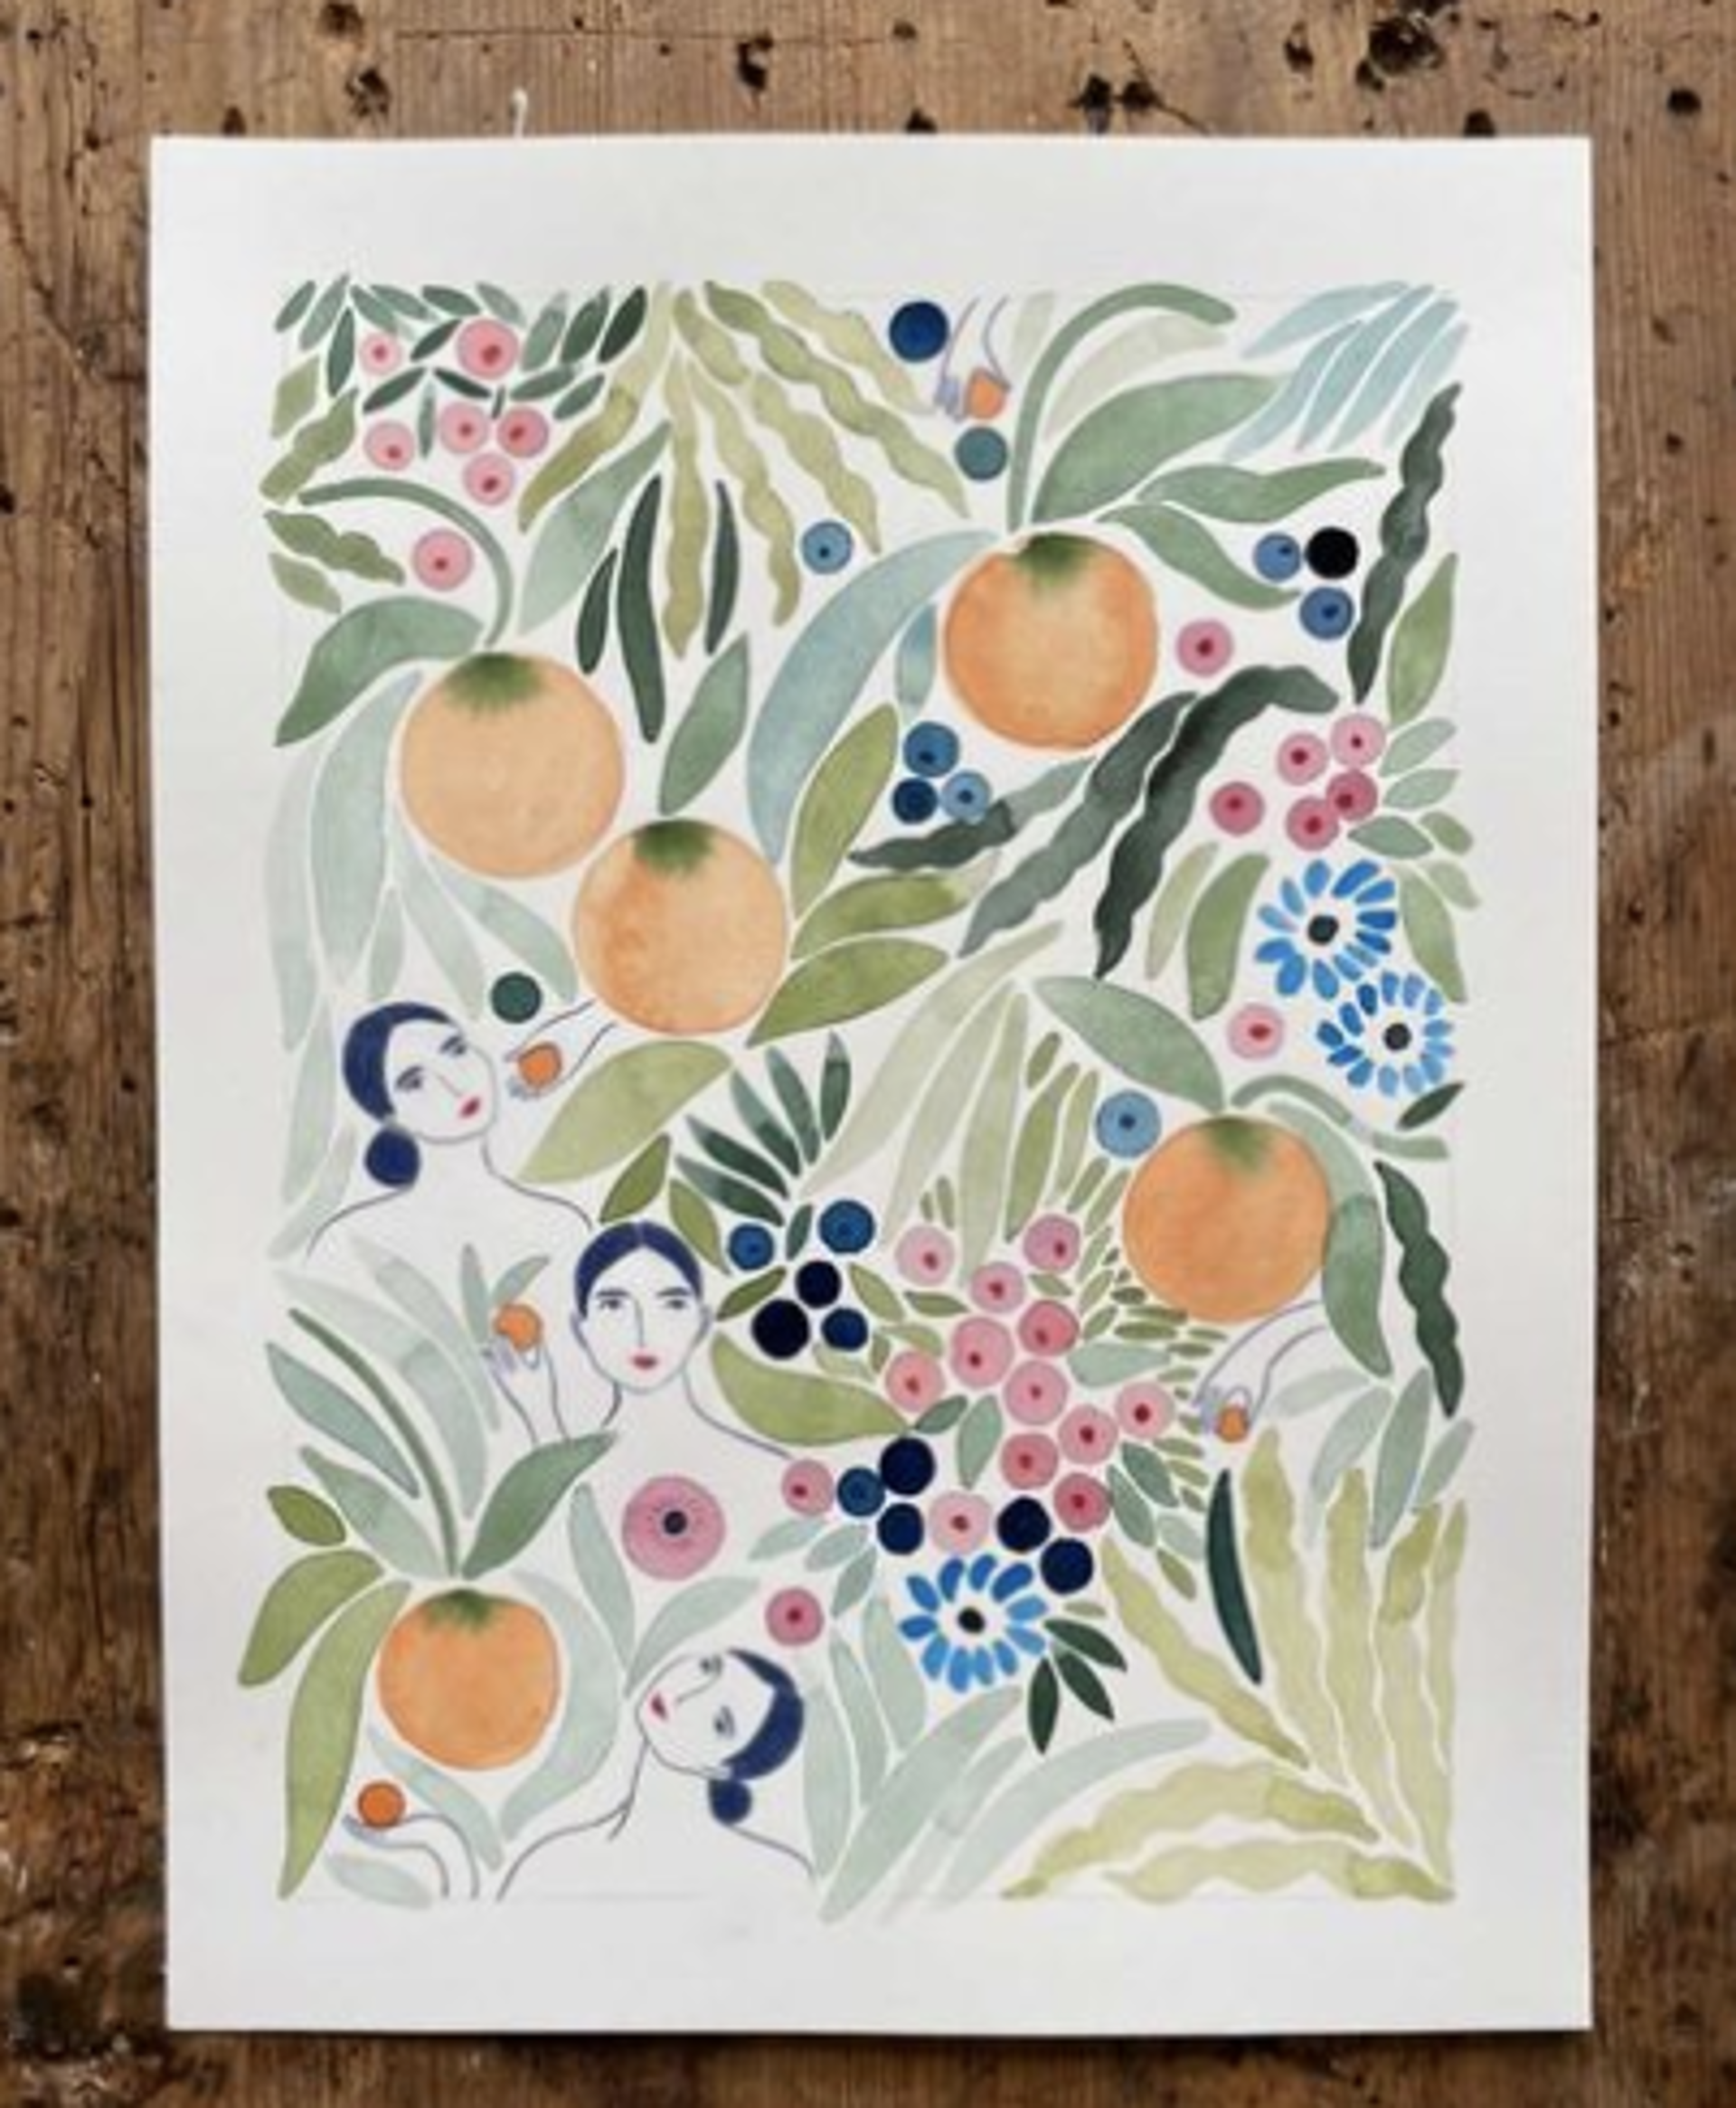 Fruit Ladies by Anine Cecilie Iversen